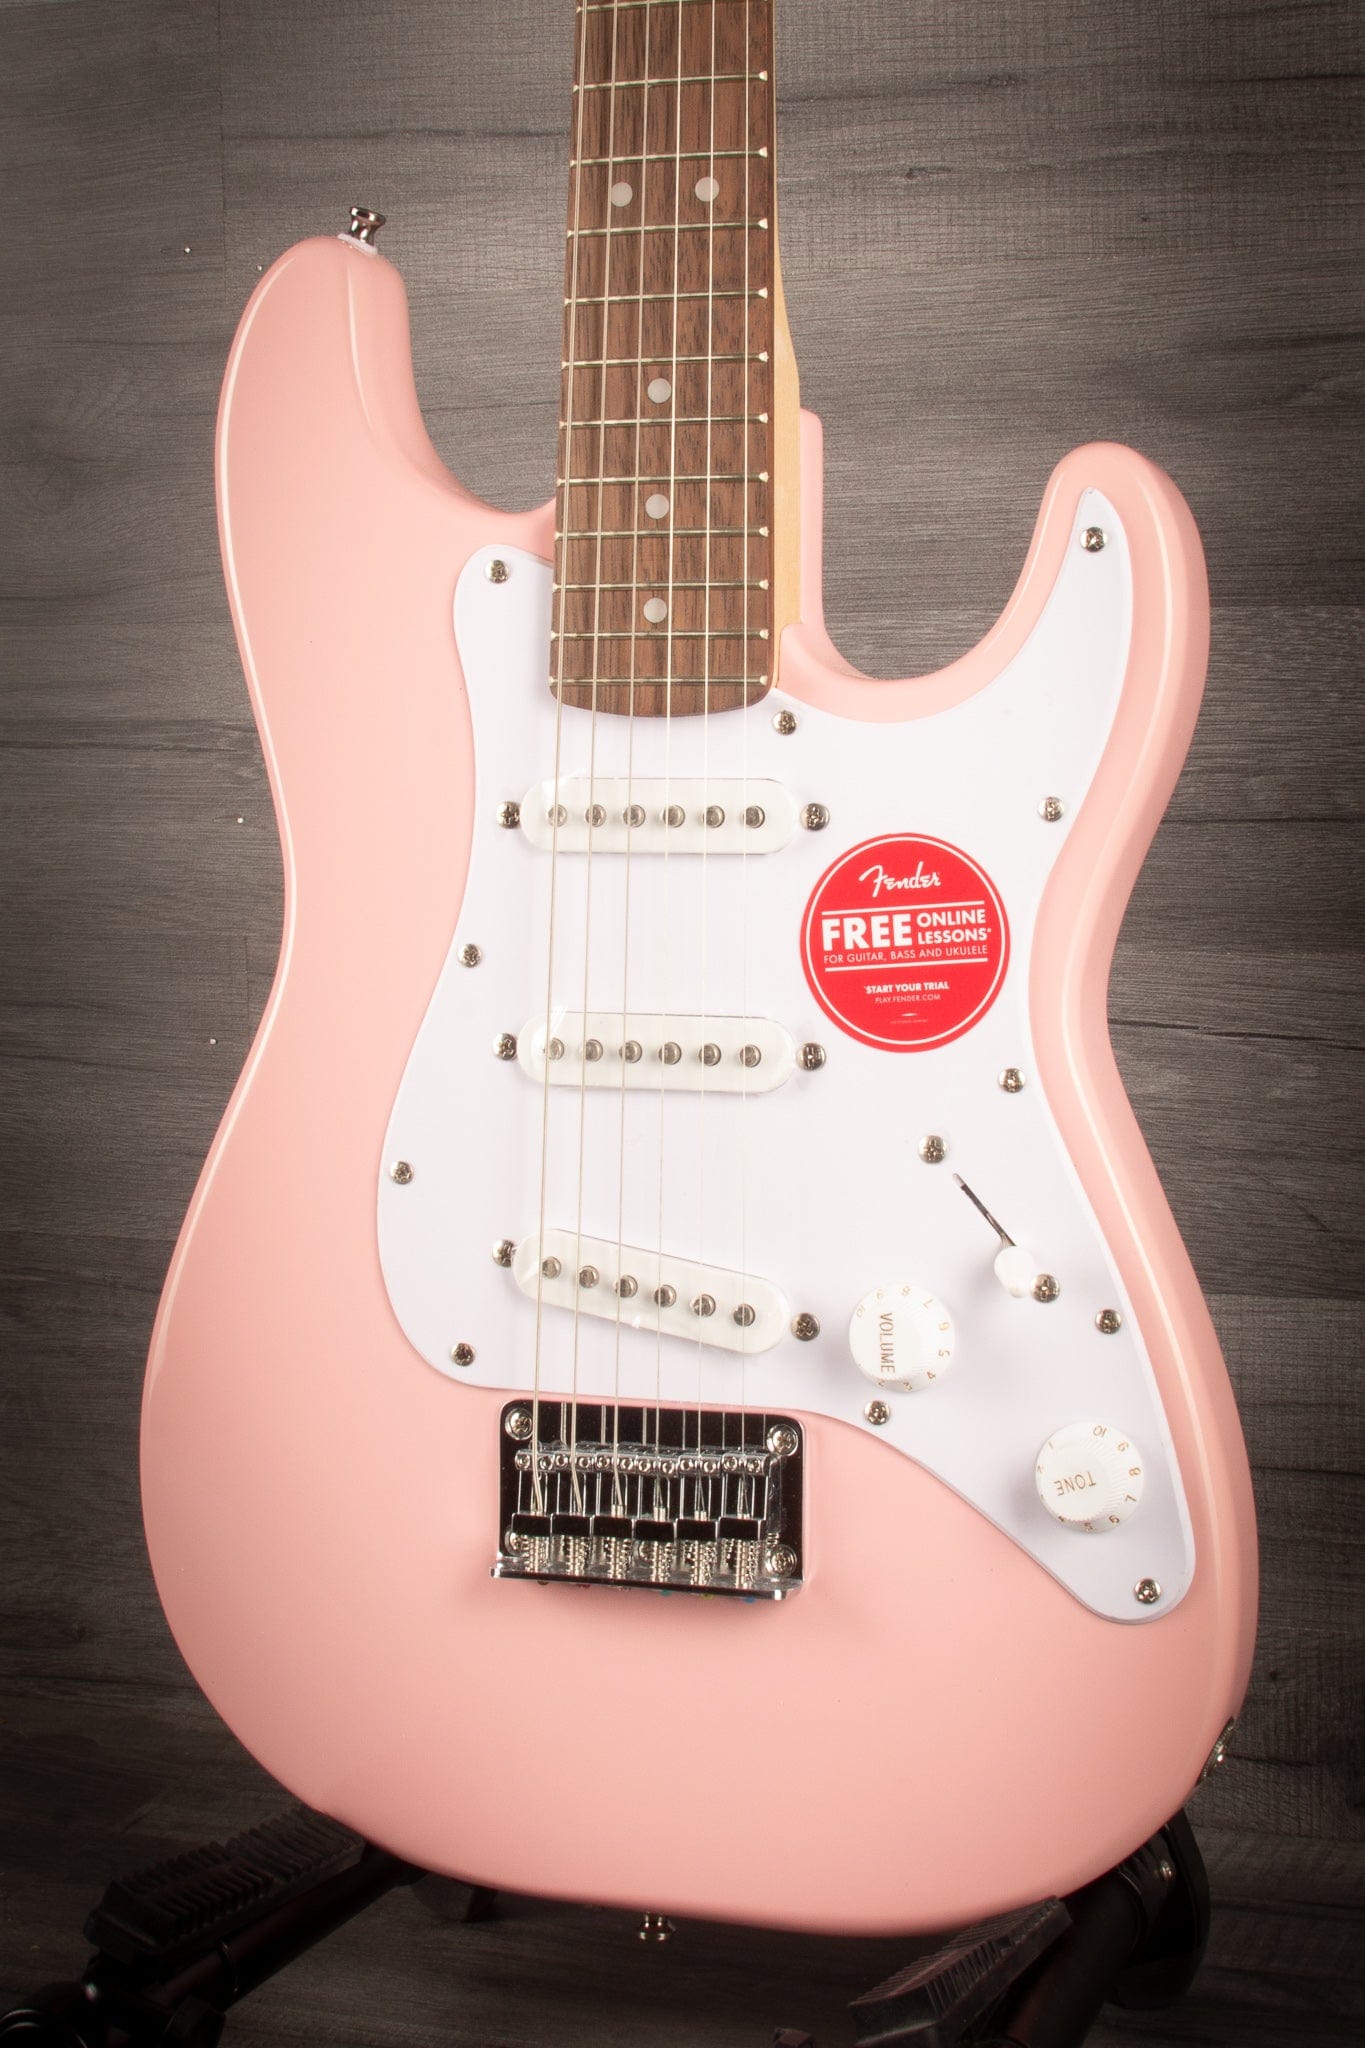 Squier Electric Guitar Fender Squier Stratocaster Mini - Shell Pink